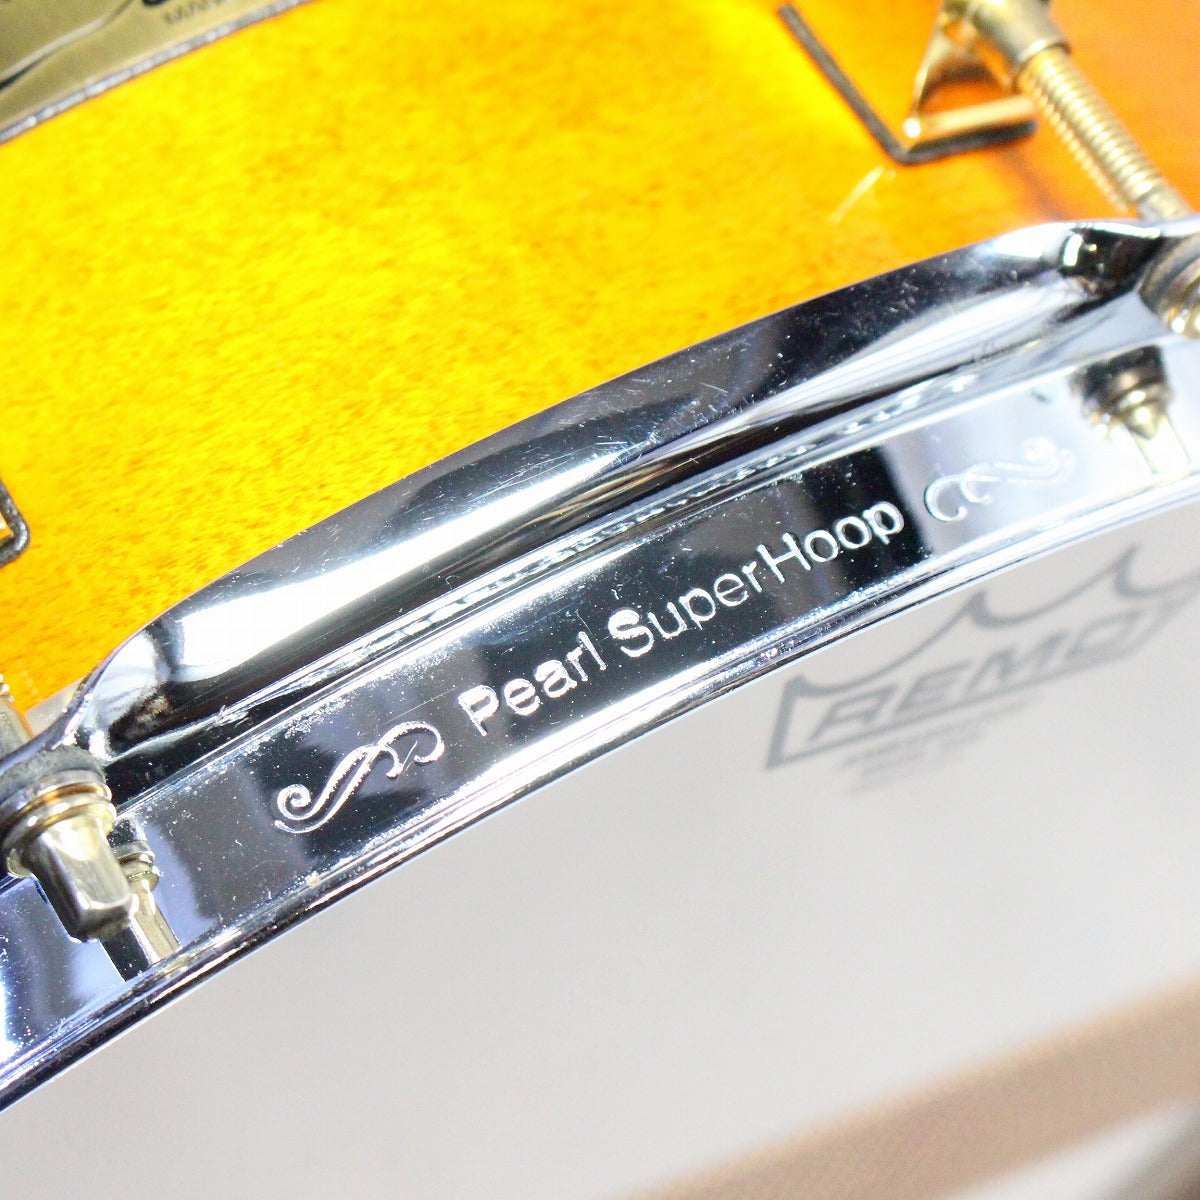 USED PEARL / CL5314D 14x6.5 Custom Classic Onepiece Maple Snare Drum [08]